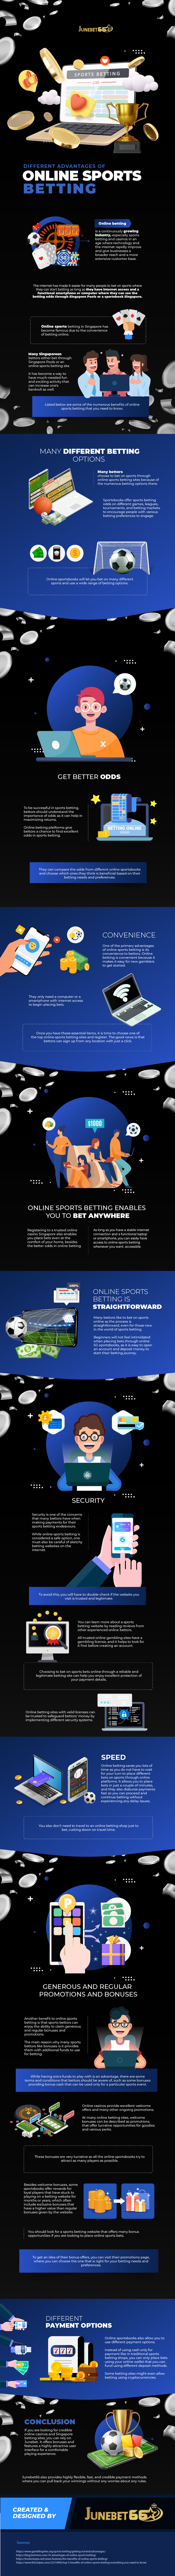 Different Advantages of Online Sports Betting-01